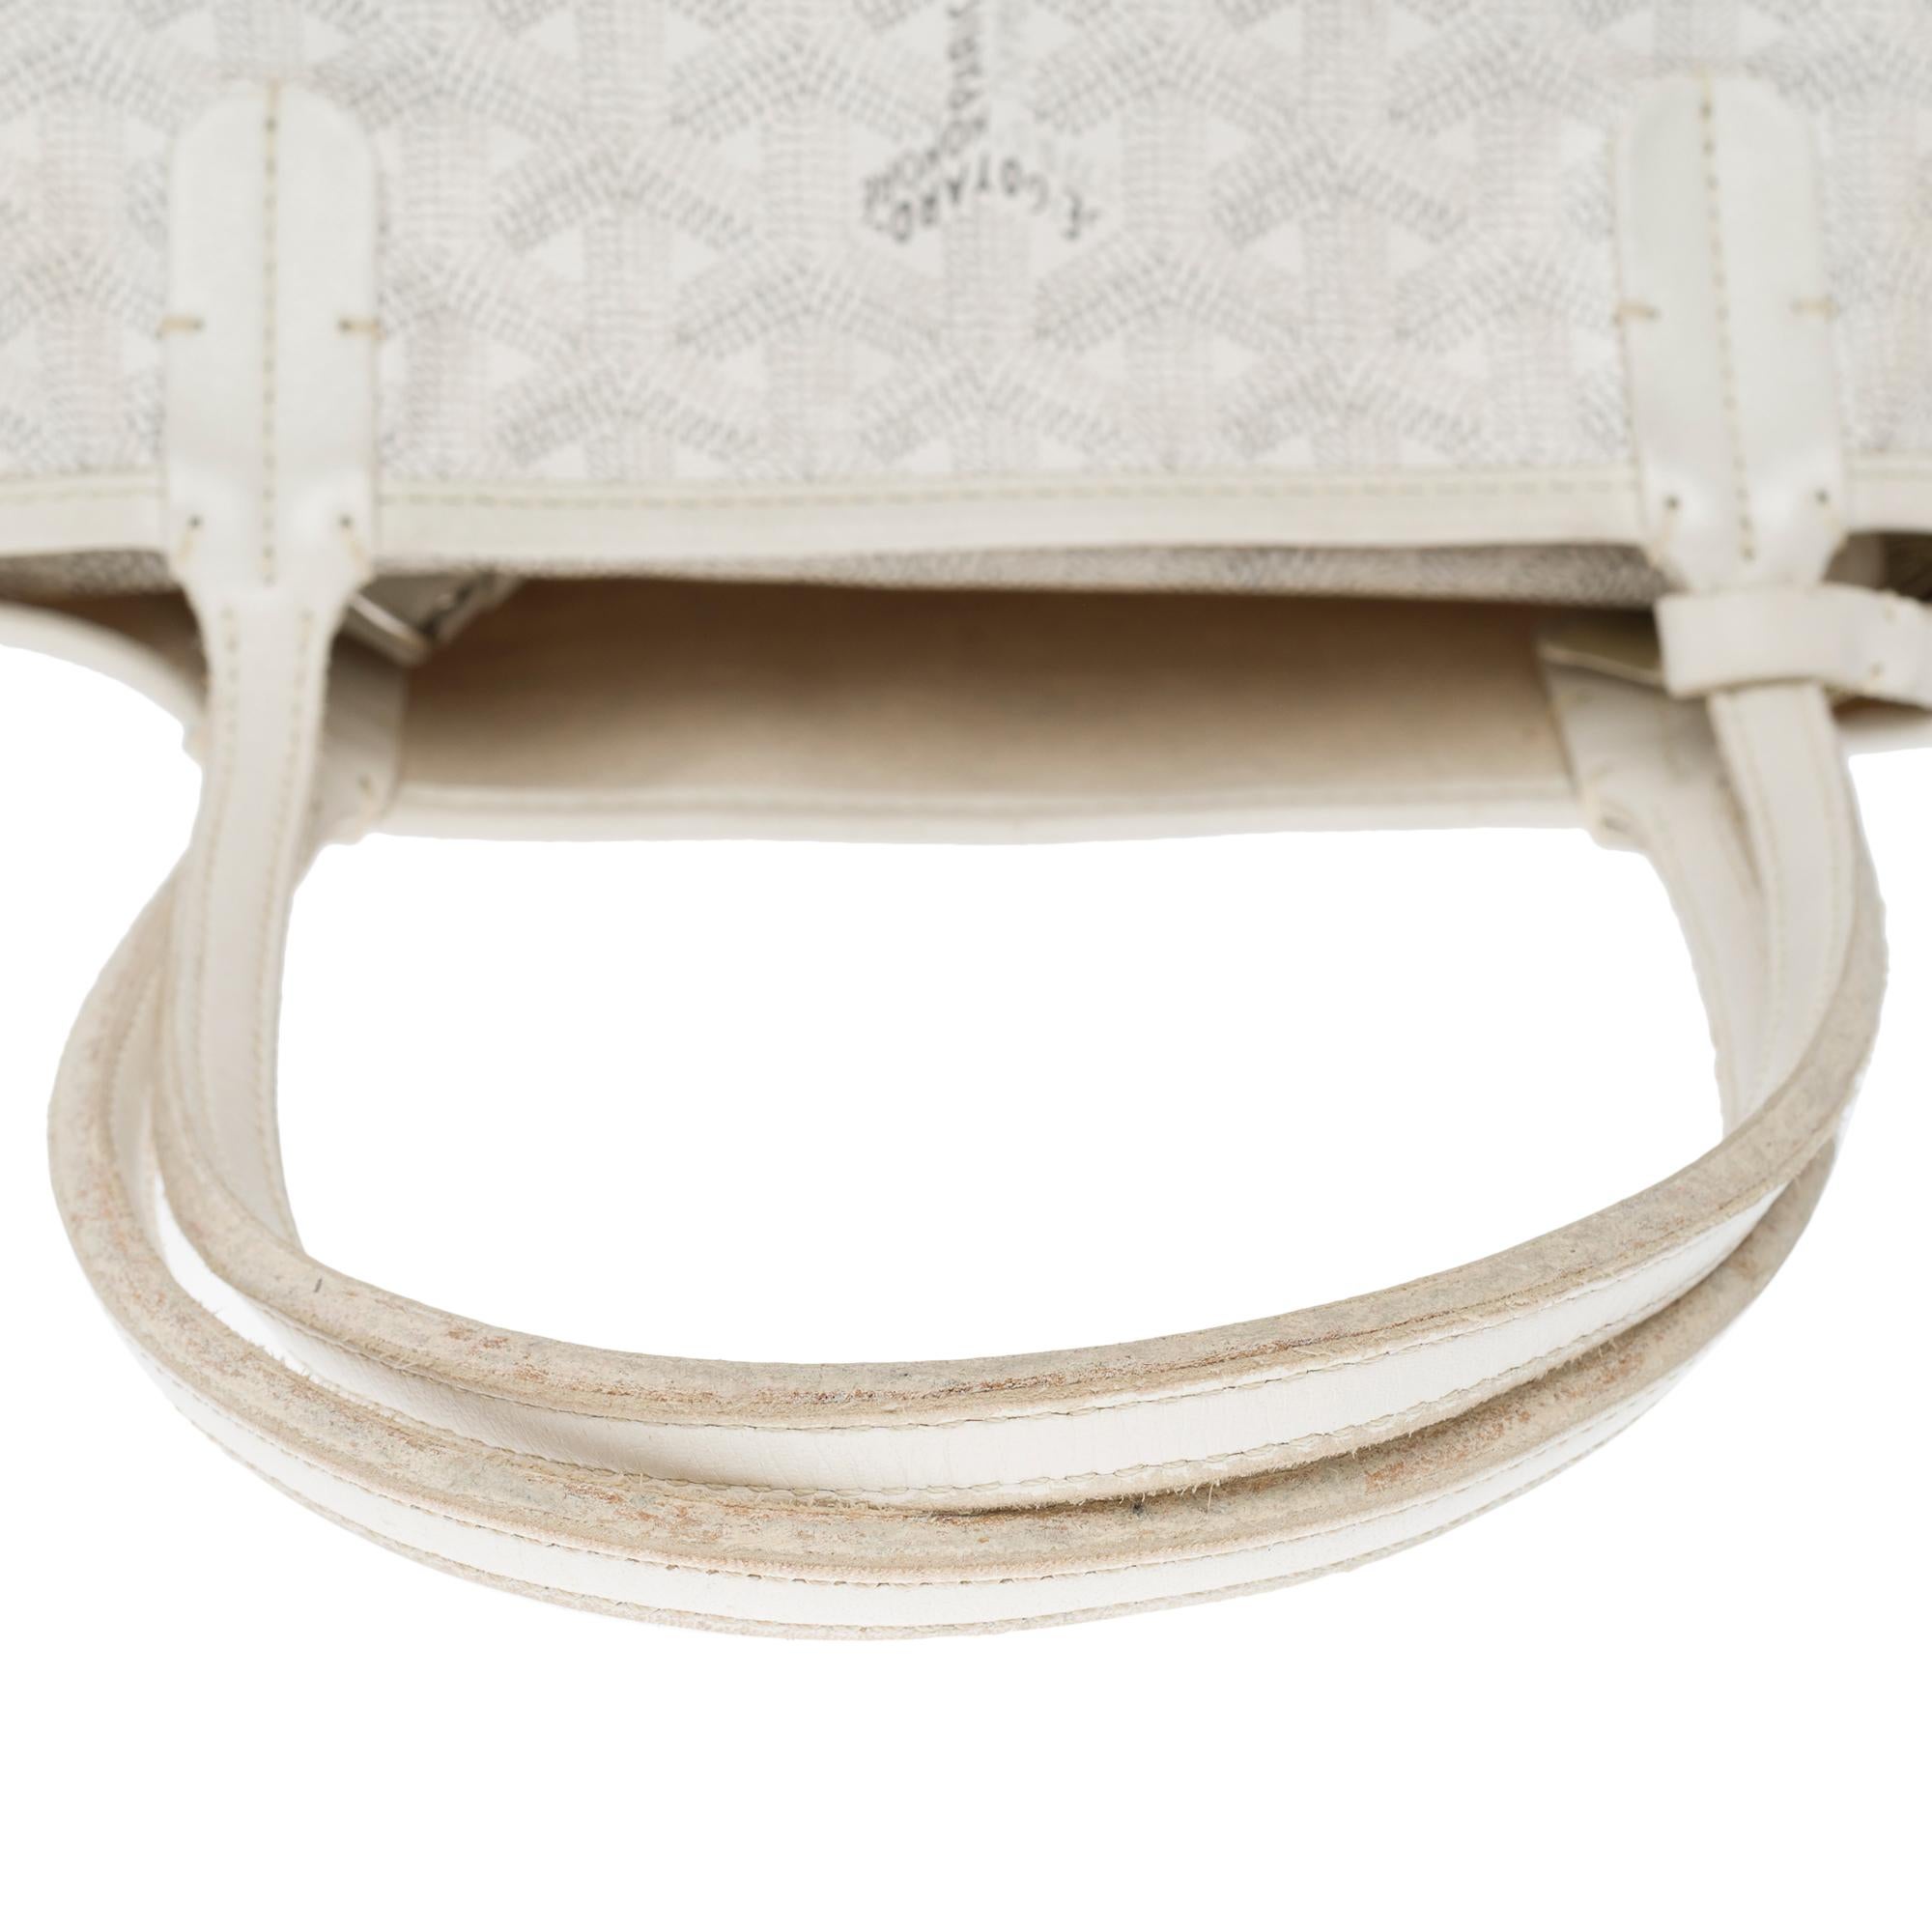 The Coveted Goyard Saint-Louis PM Tote bag in White canvas and leather, SHW For Sale 6